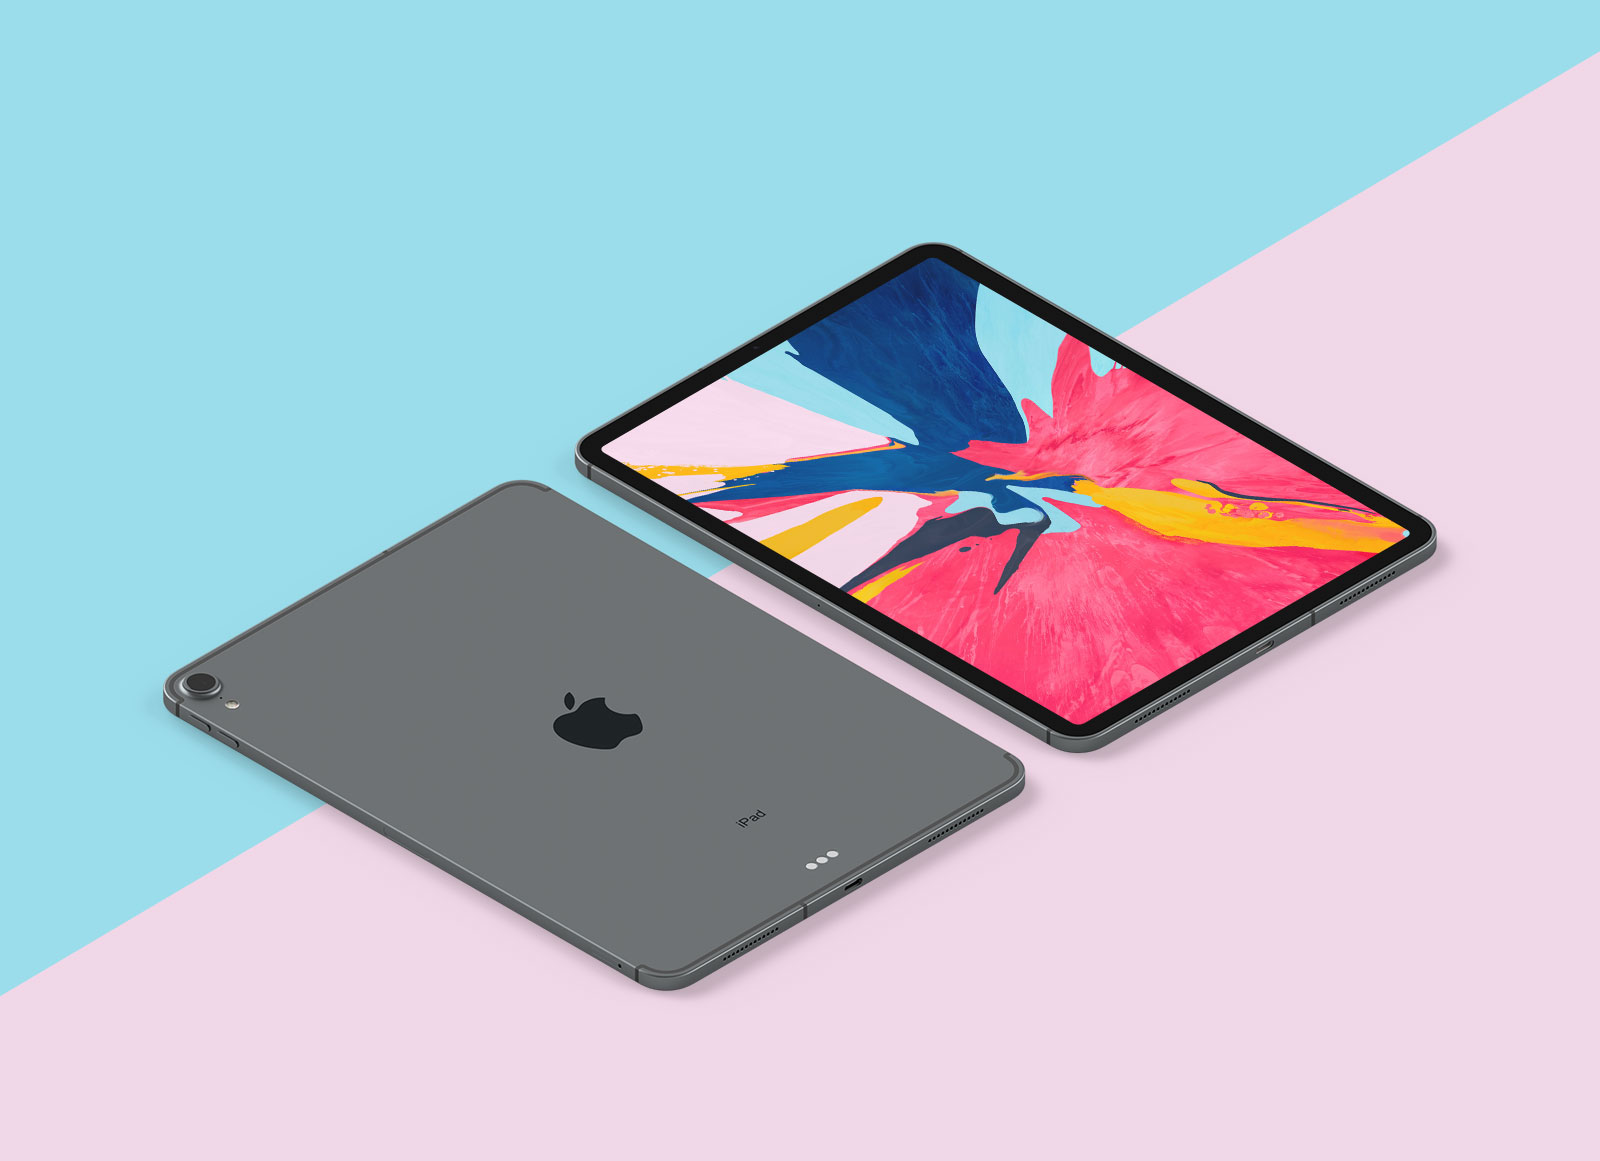 Download Free New iPad Pro 2018 Mockup PSD in Perspective View ... PSD Mockup Templates